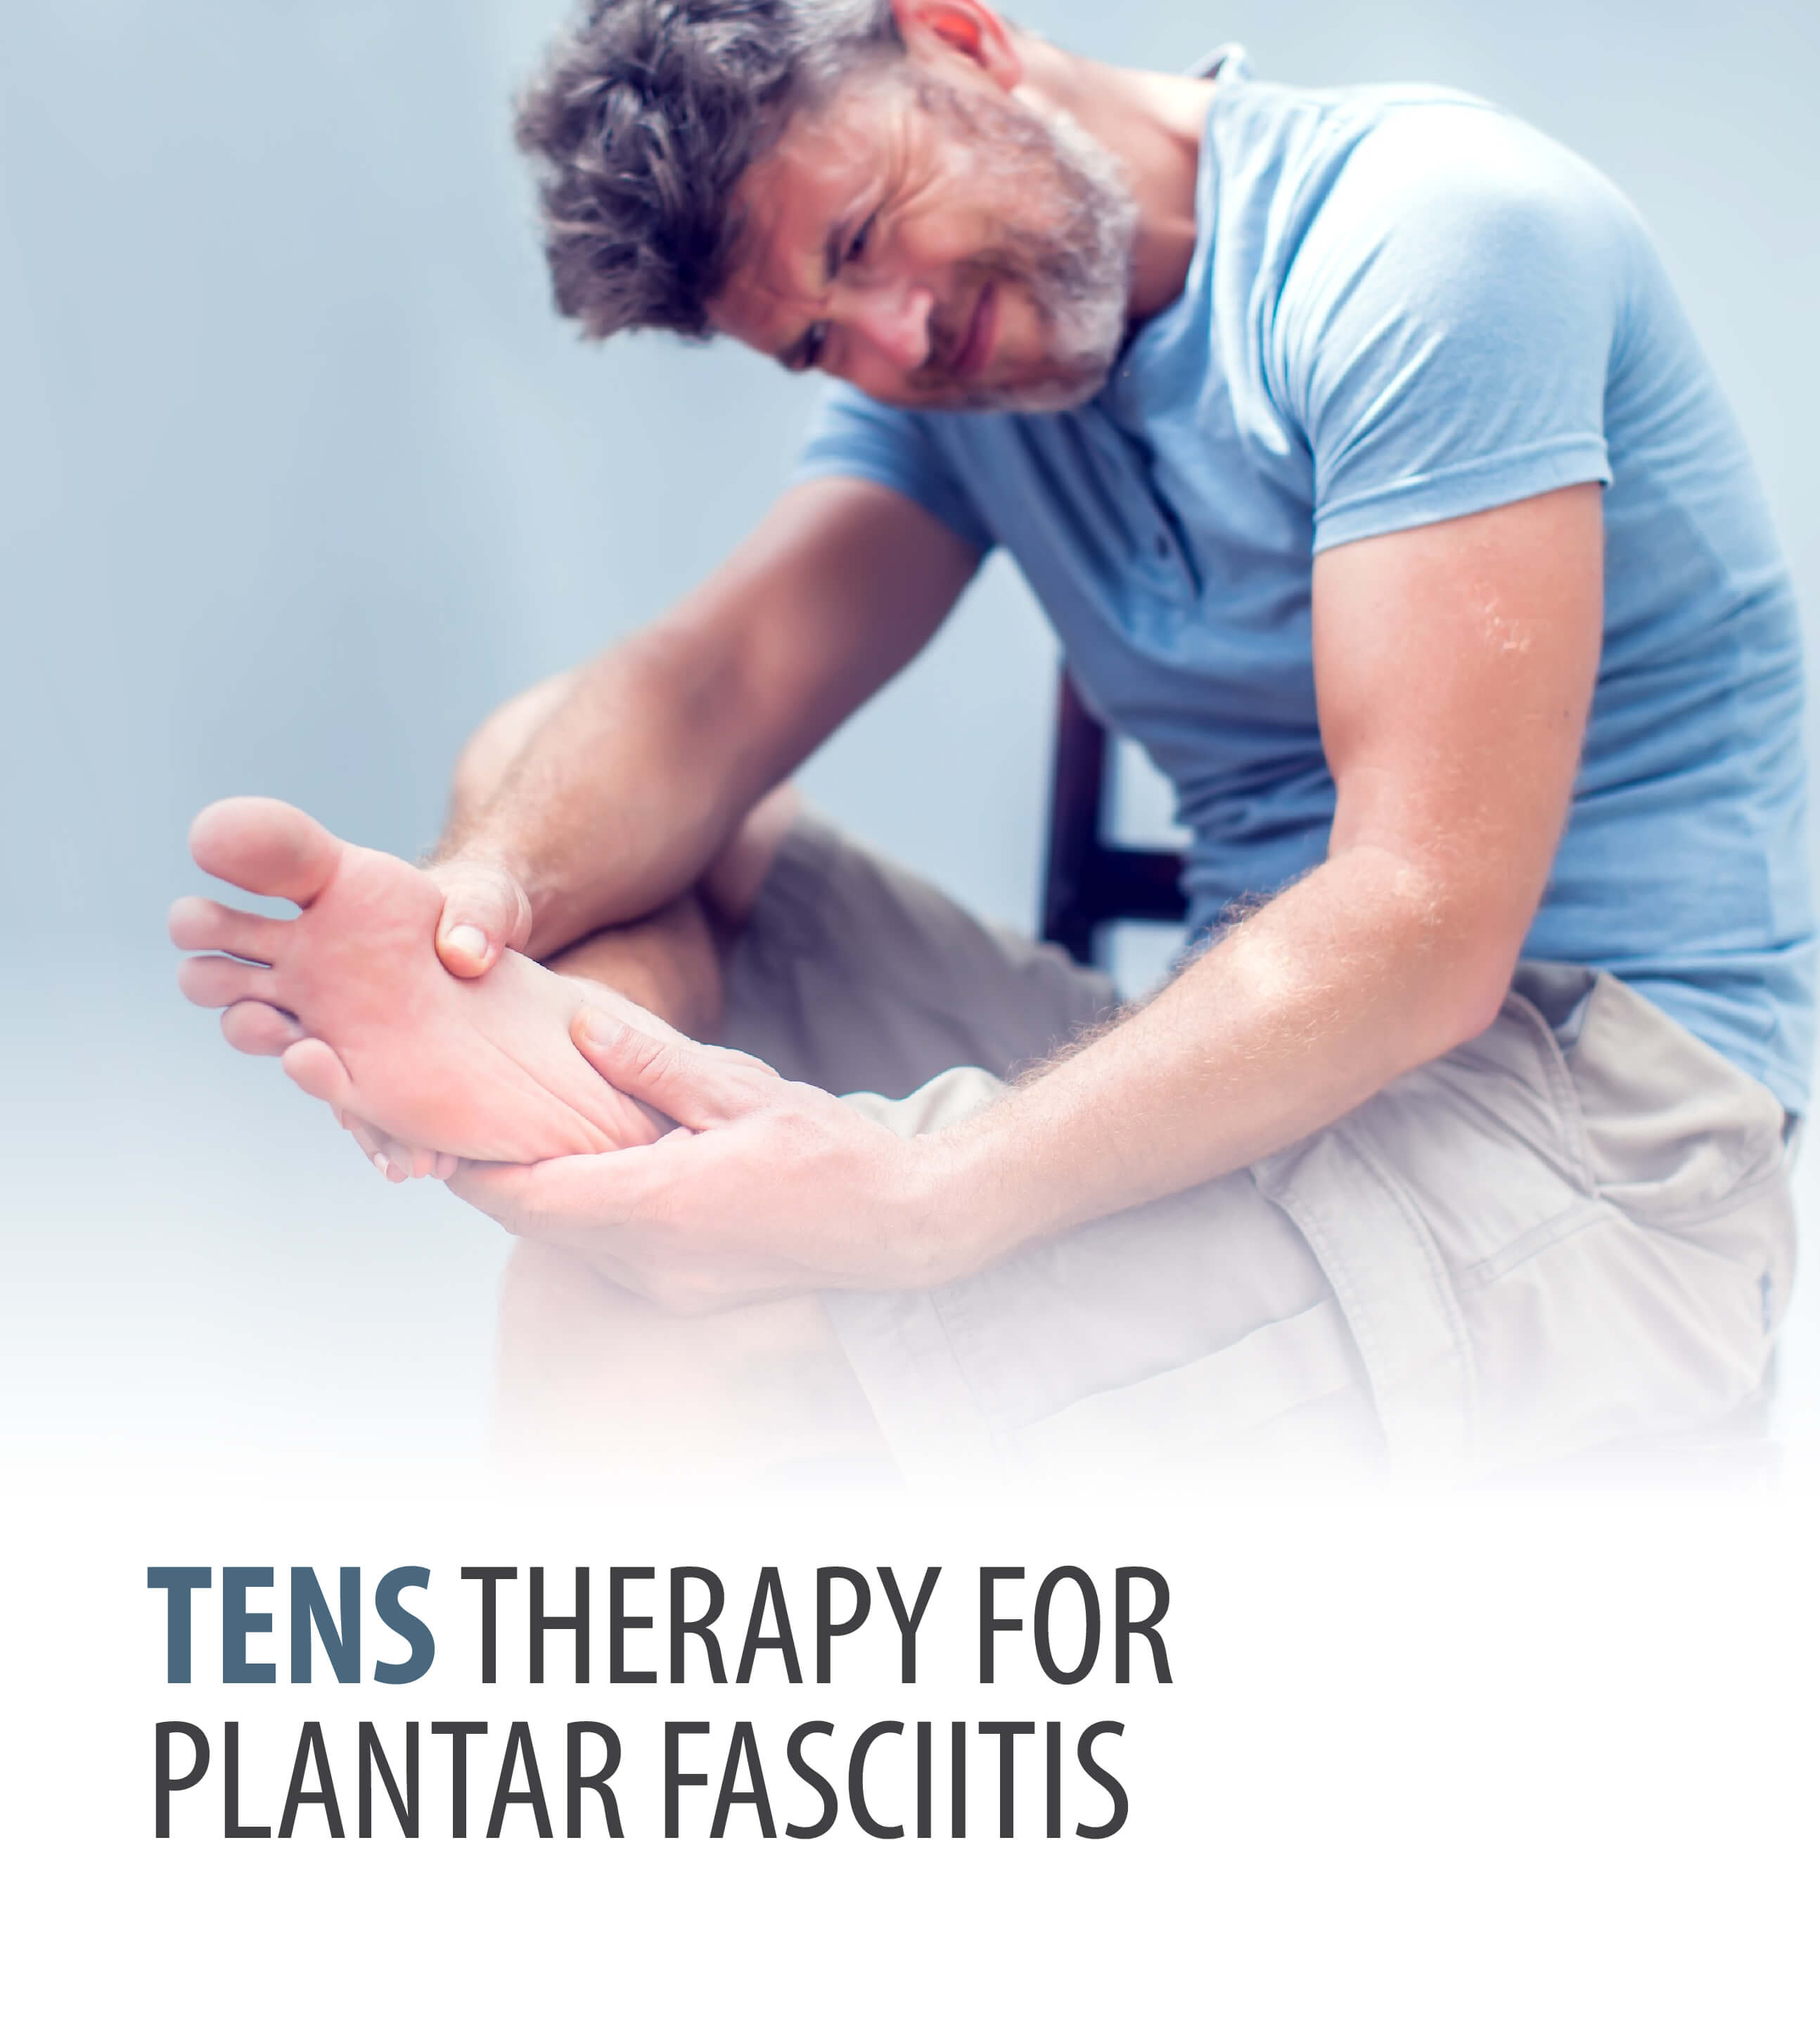 TENS Therapy for Plantar Fasciitis